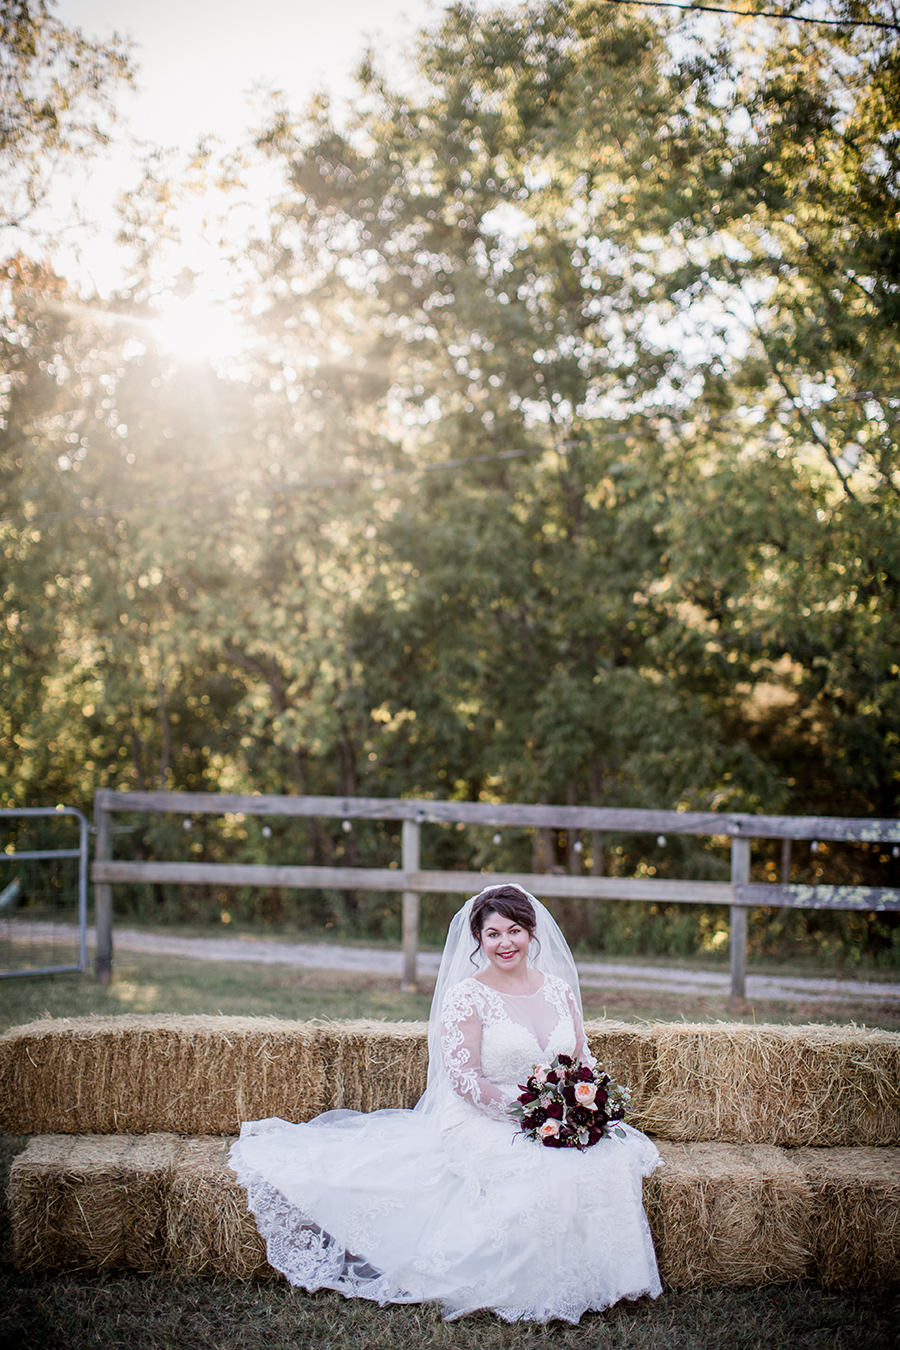 Sitting on hay bales with sun flare at this bridal session at The Barn at High Point Farms by Knoxville Wedding Photographer, Amanda May Photos.